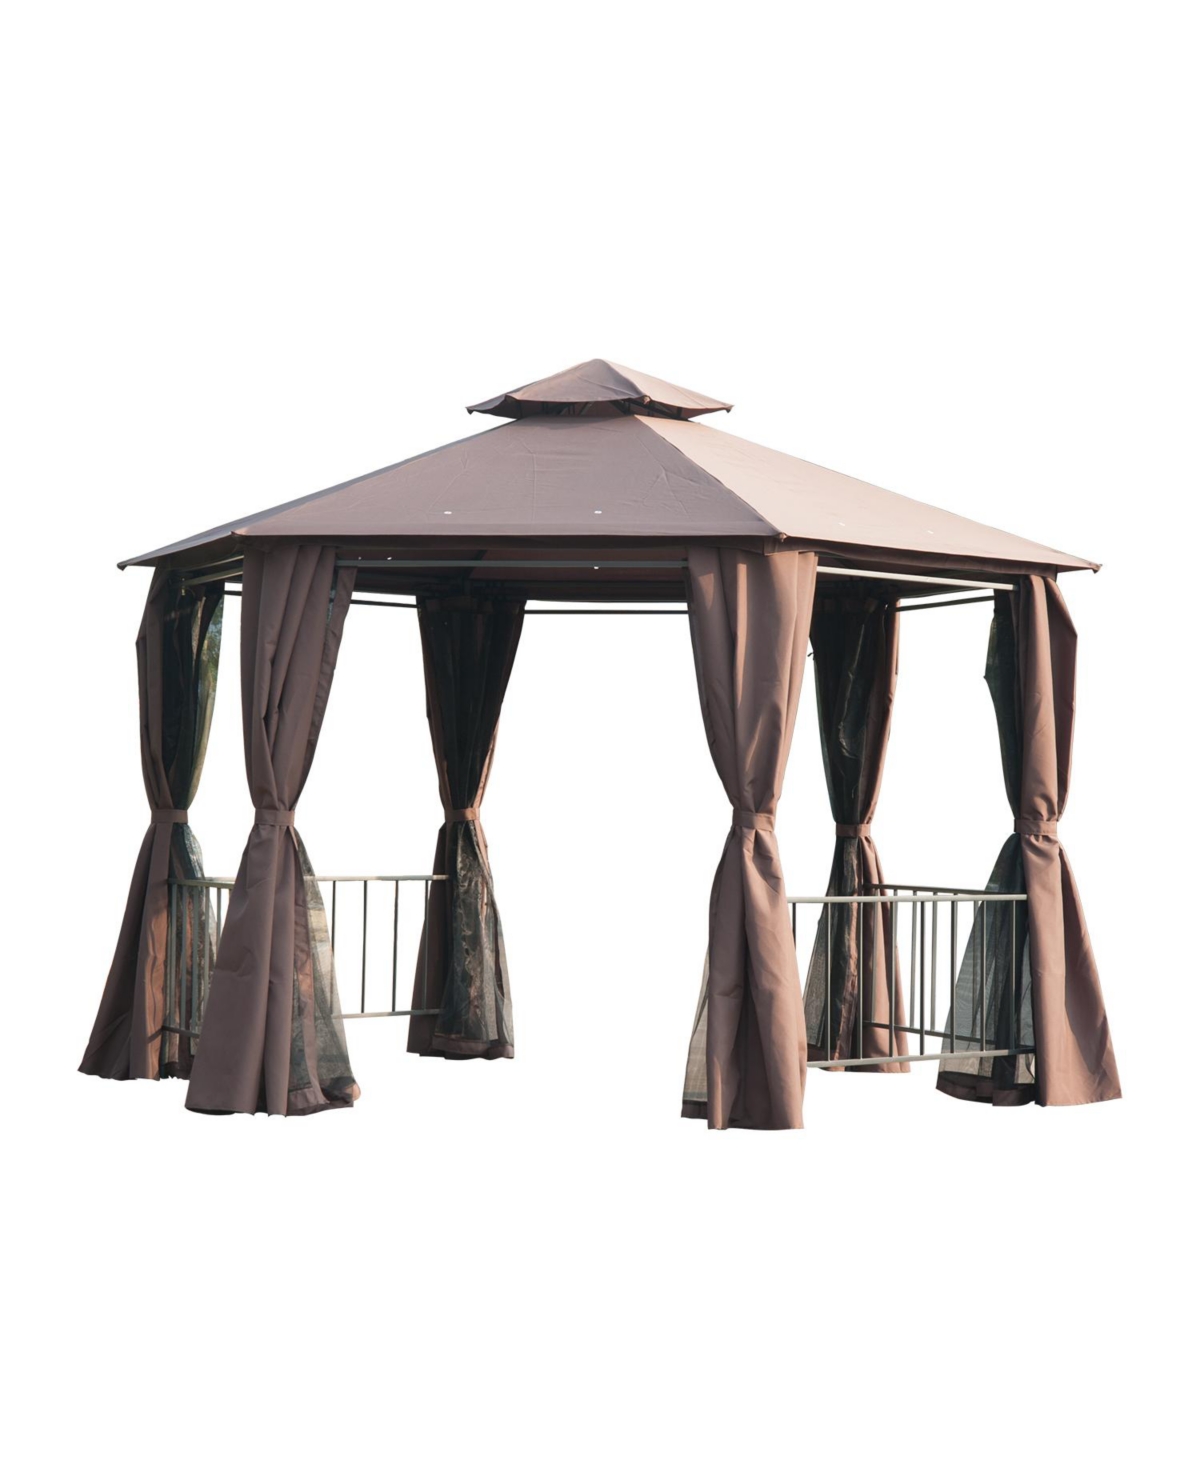 13' x 13' Patio Gazebo, Double Roof Hexagon Outdoor Gazebo Canopy Shelter w/ with Netting & Curtains, Solid Steel Frame for Garden, Lawn, Bac